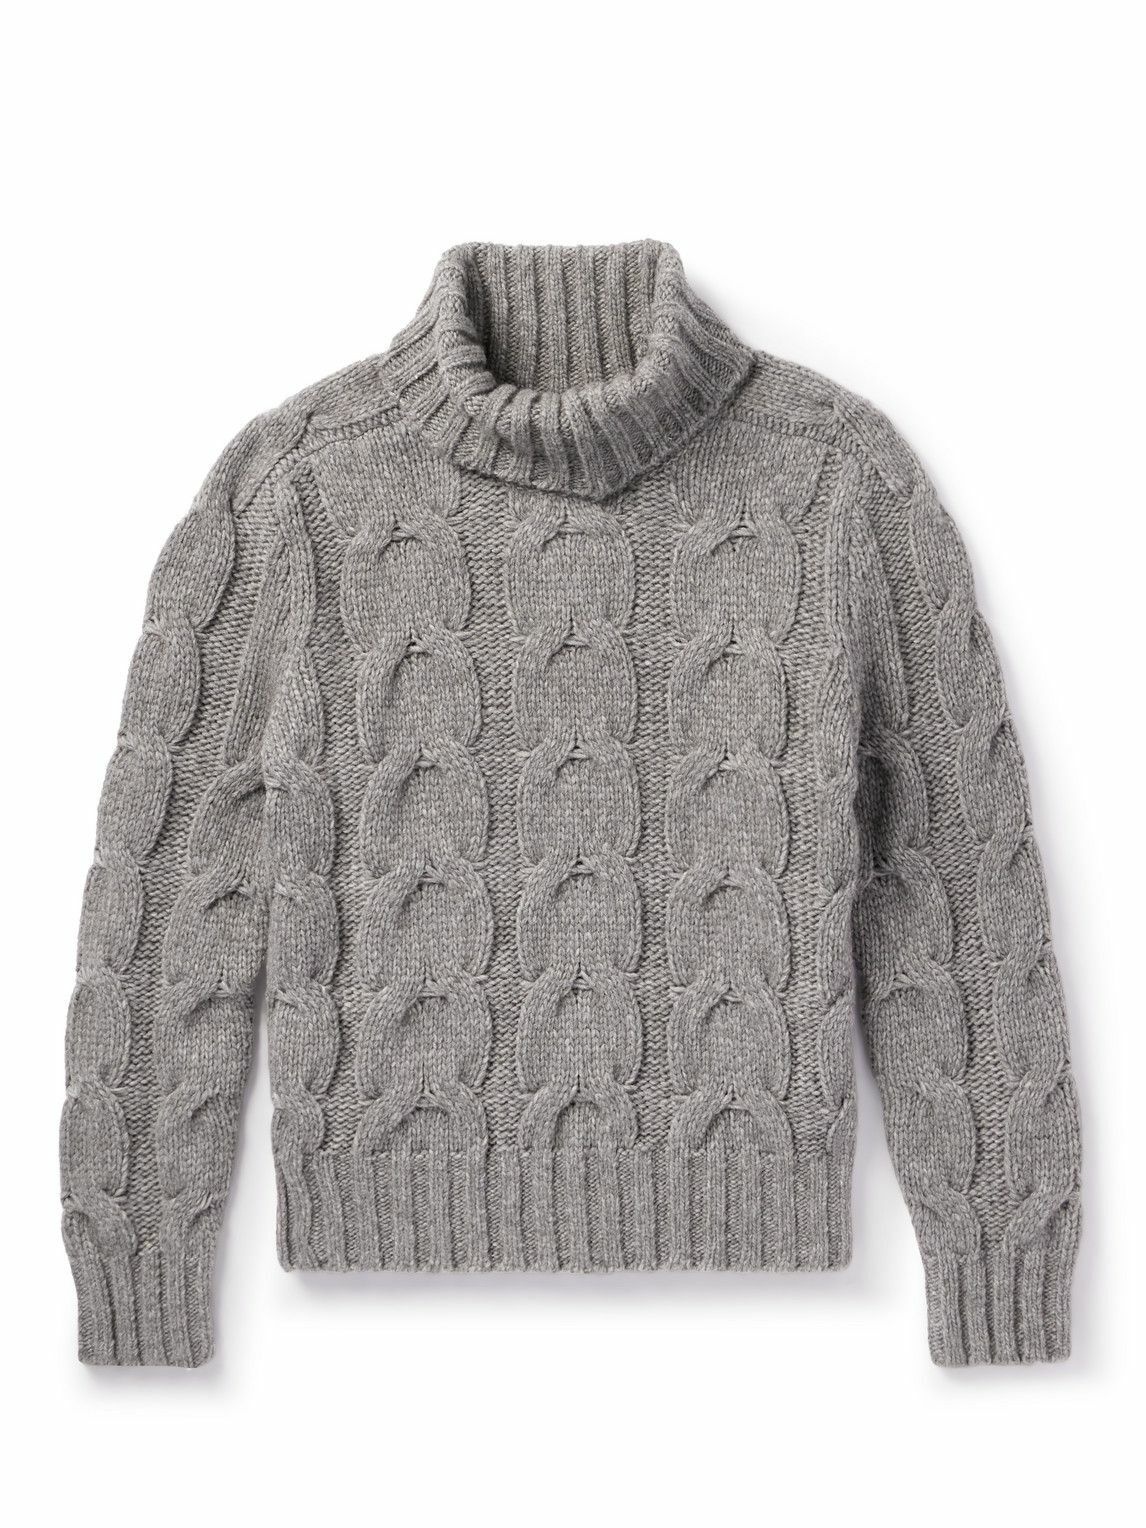 TOM FORD - Cable-Knit Wool-Blend Rollneck Sweater - Gray TOM FORD